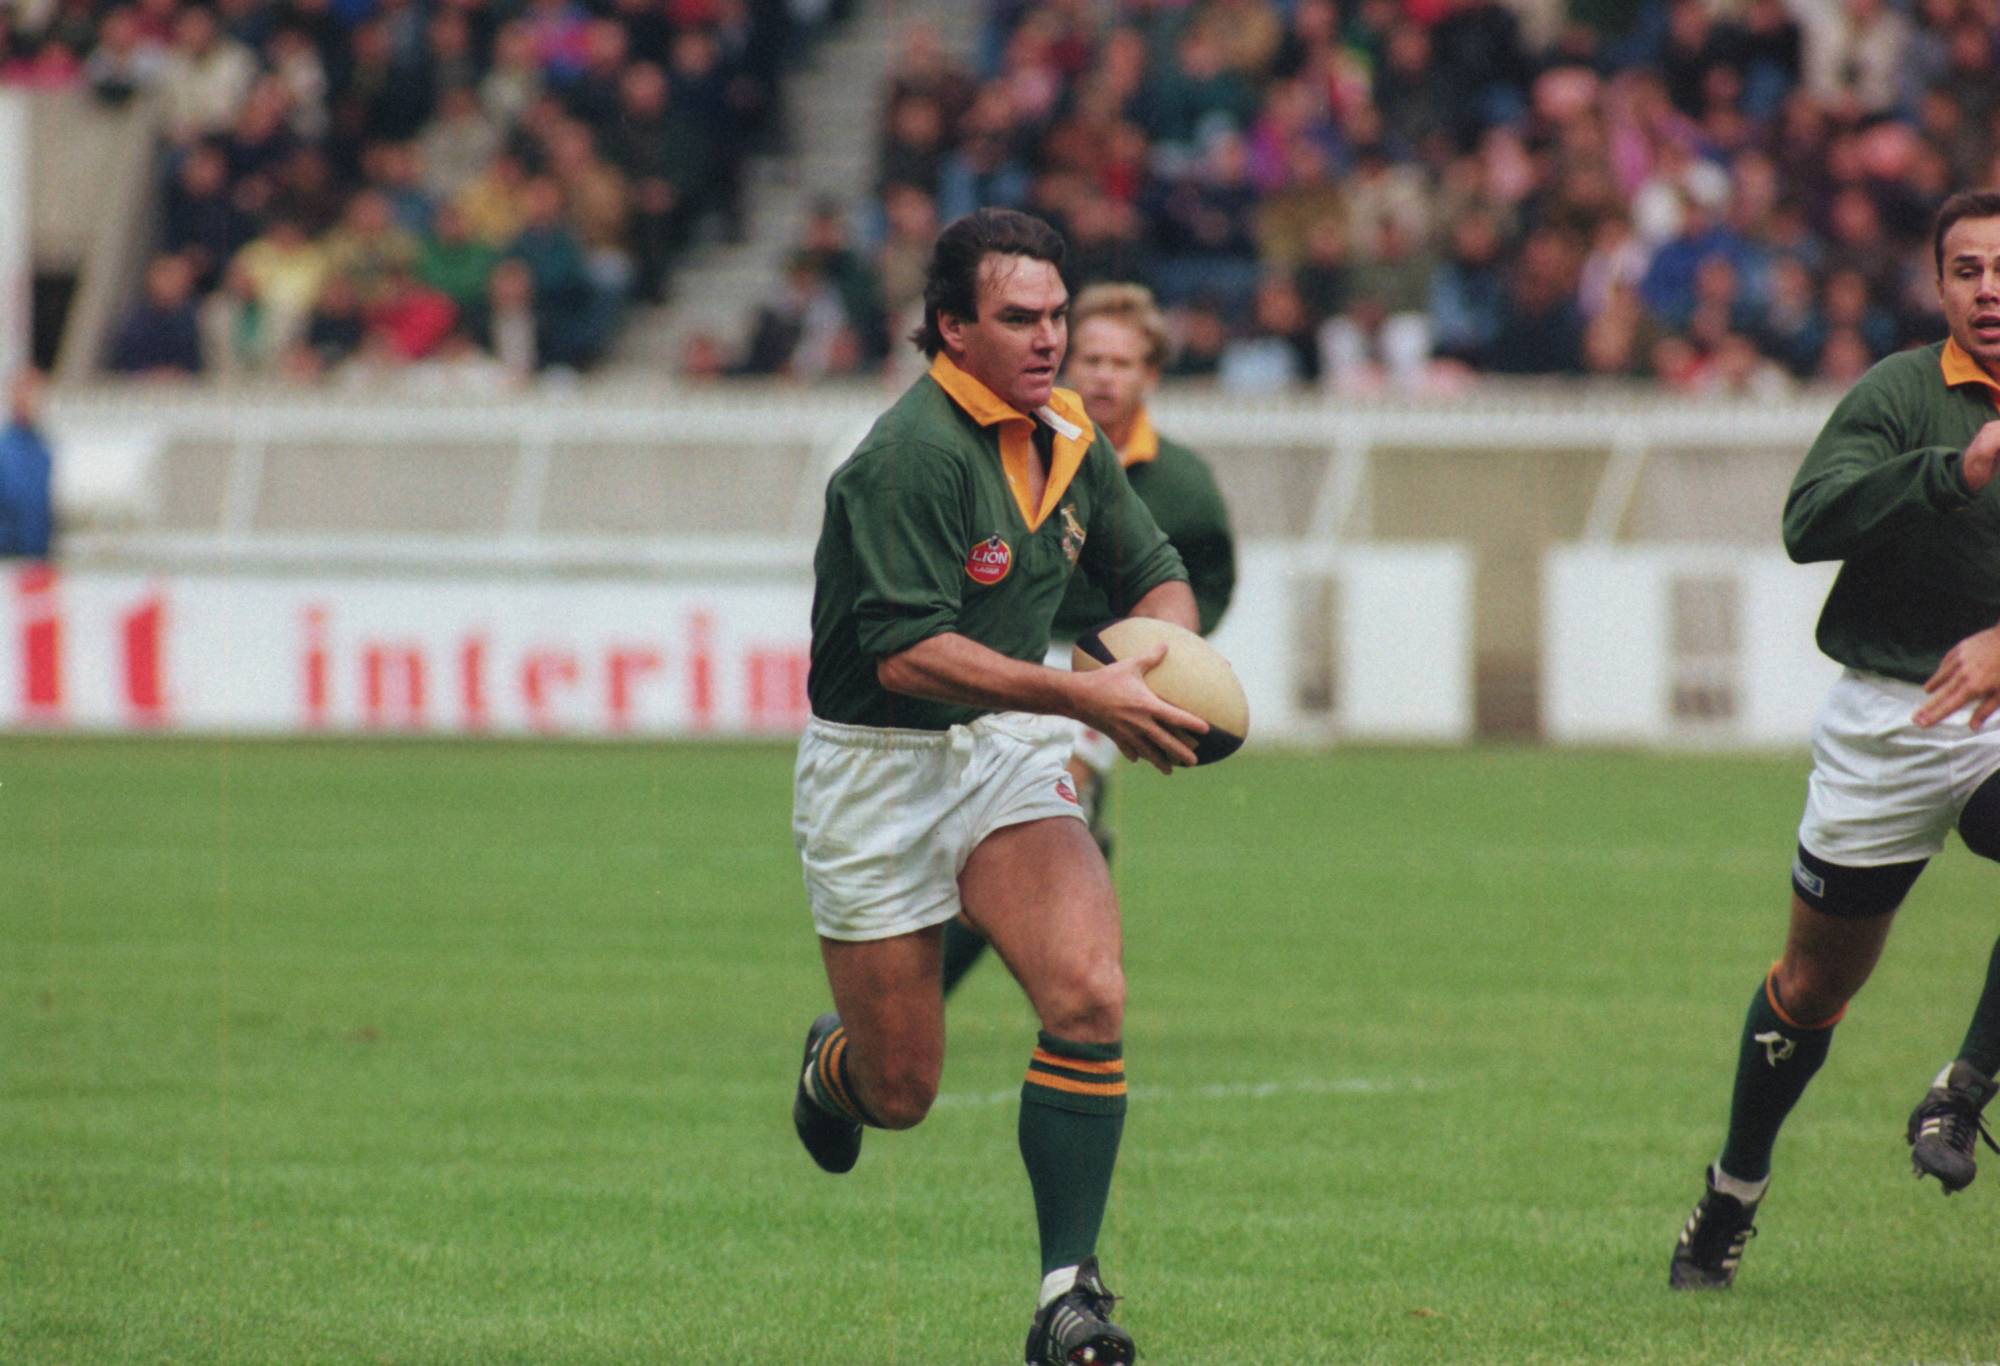 South African rugby player Danie Gerber during the second friendly match between France and South Africa at Parc des Princes in Paris, October 24, 1992. France won 29 points to 16.  (Photo by Howard Boylan/Getty Images)